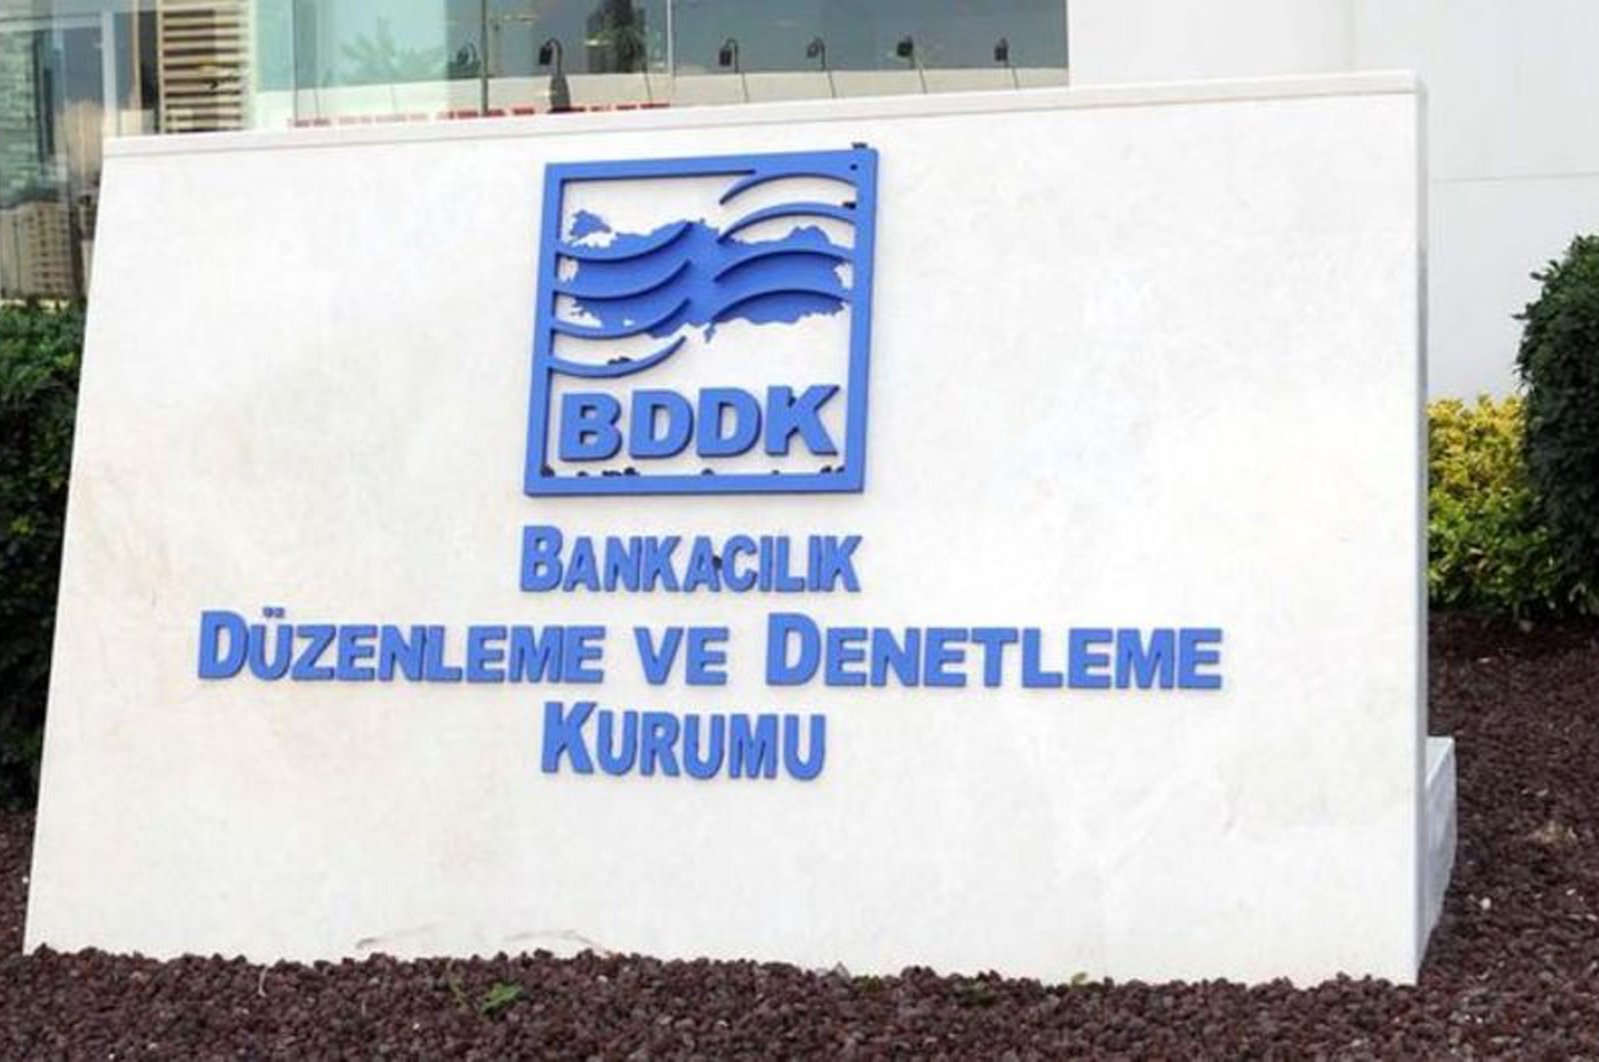 The Banking Regulation and Supervision Agency's (BDDK) logo is seen in front of its Istanbul headquarters.